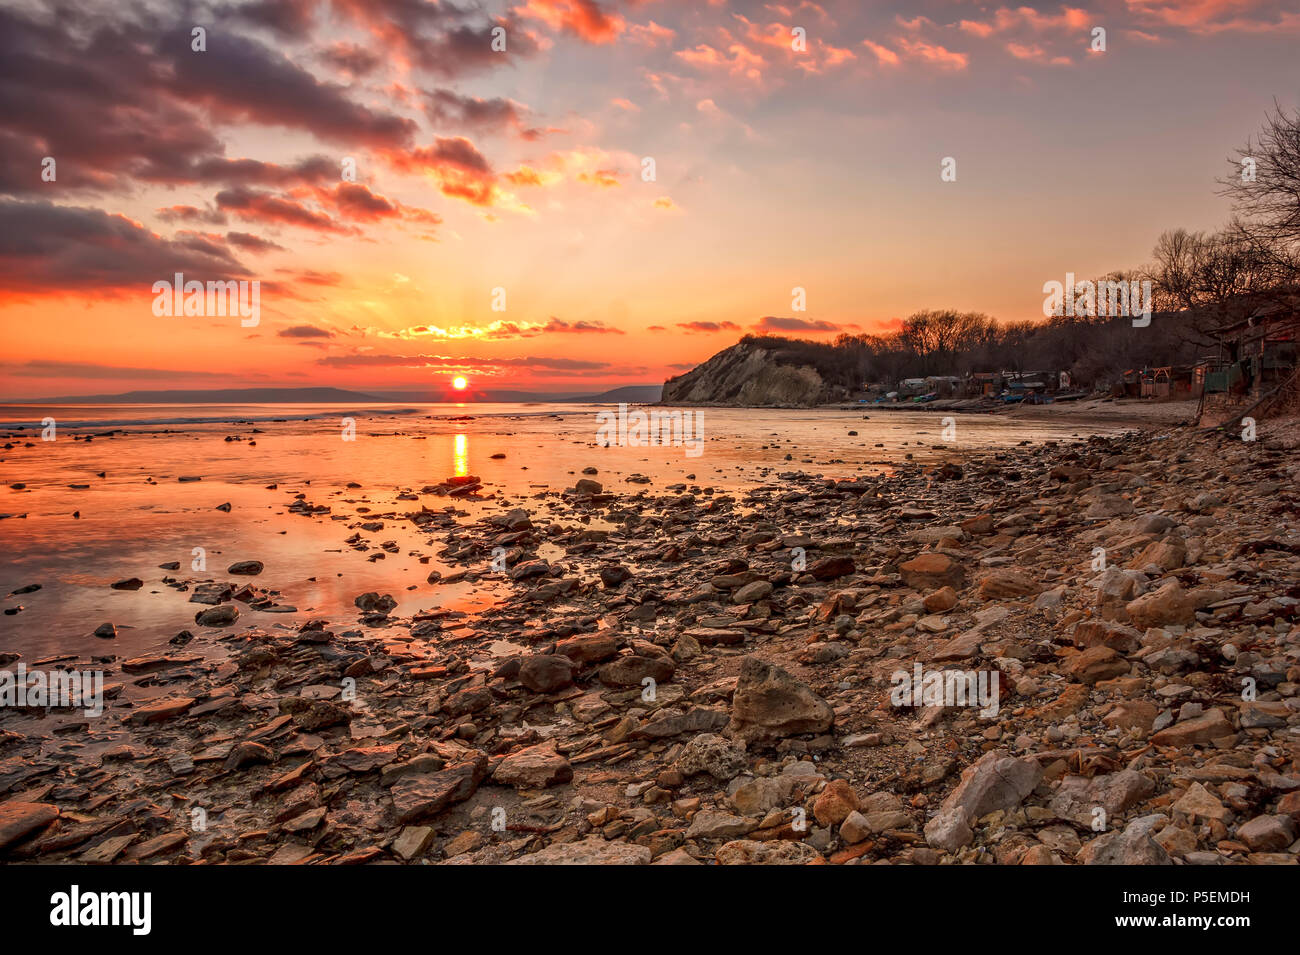 Exciting sunset/sunrise on the rocky coast with water reflection Stock Photo